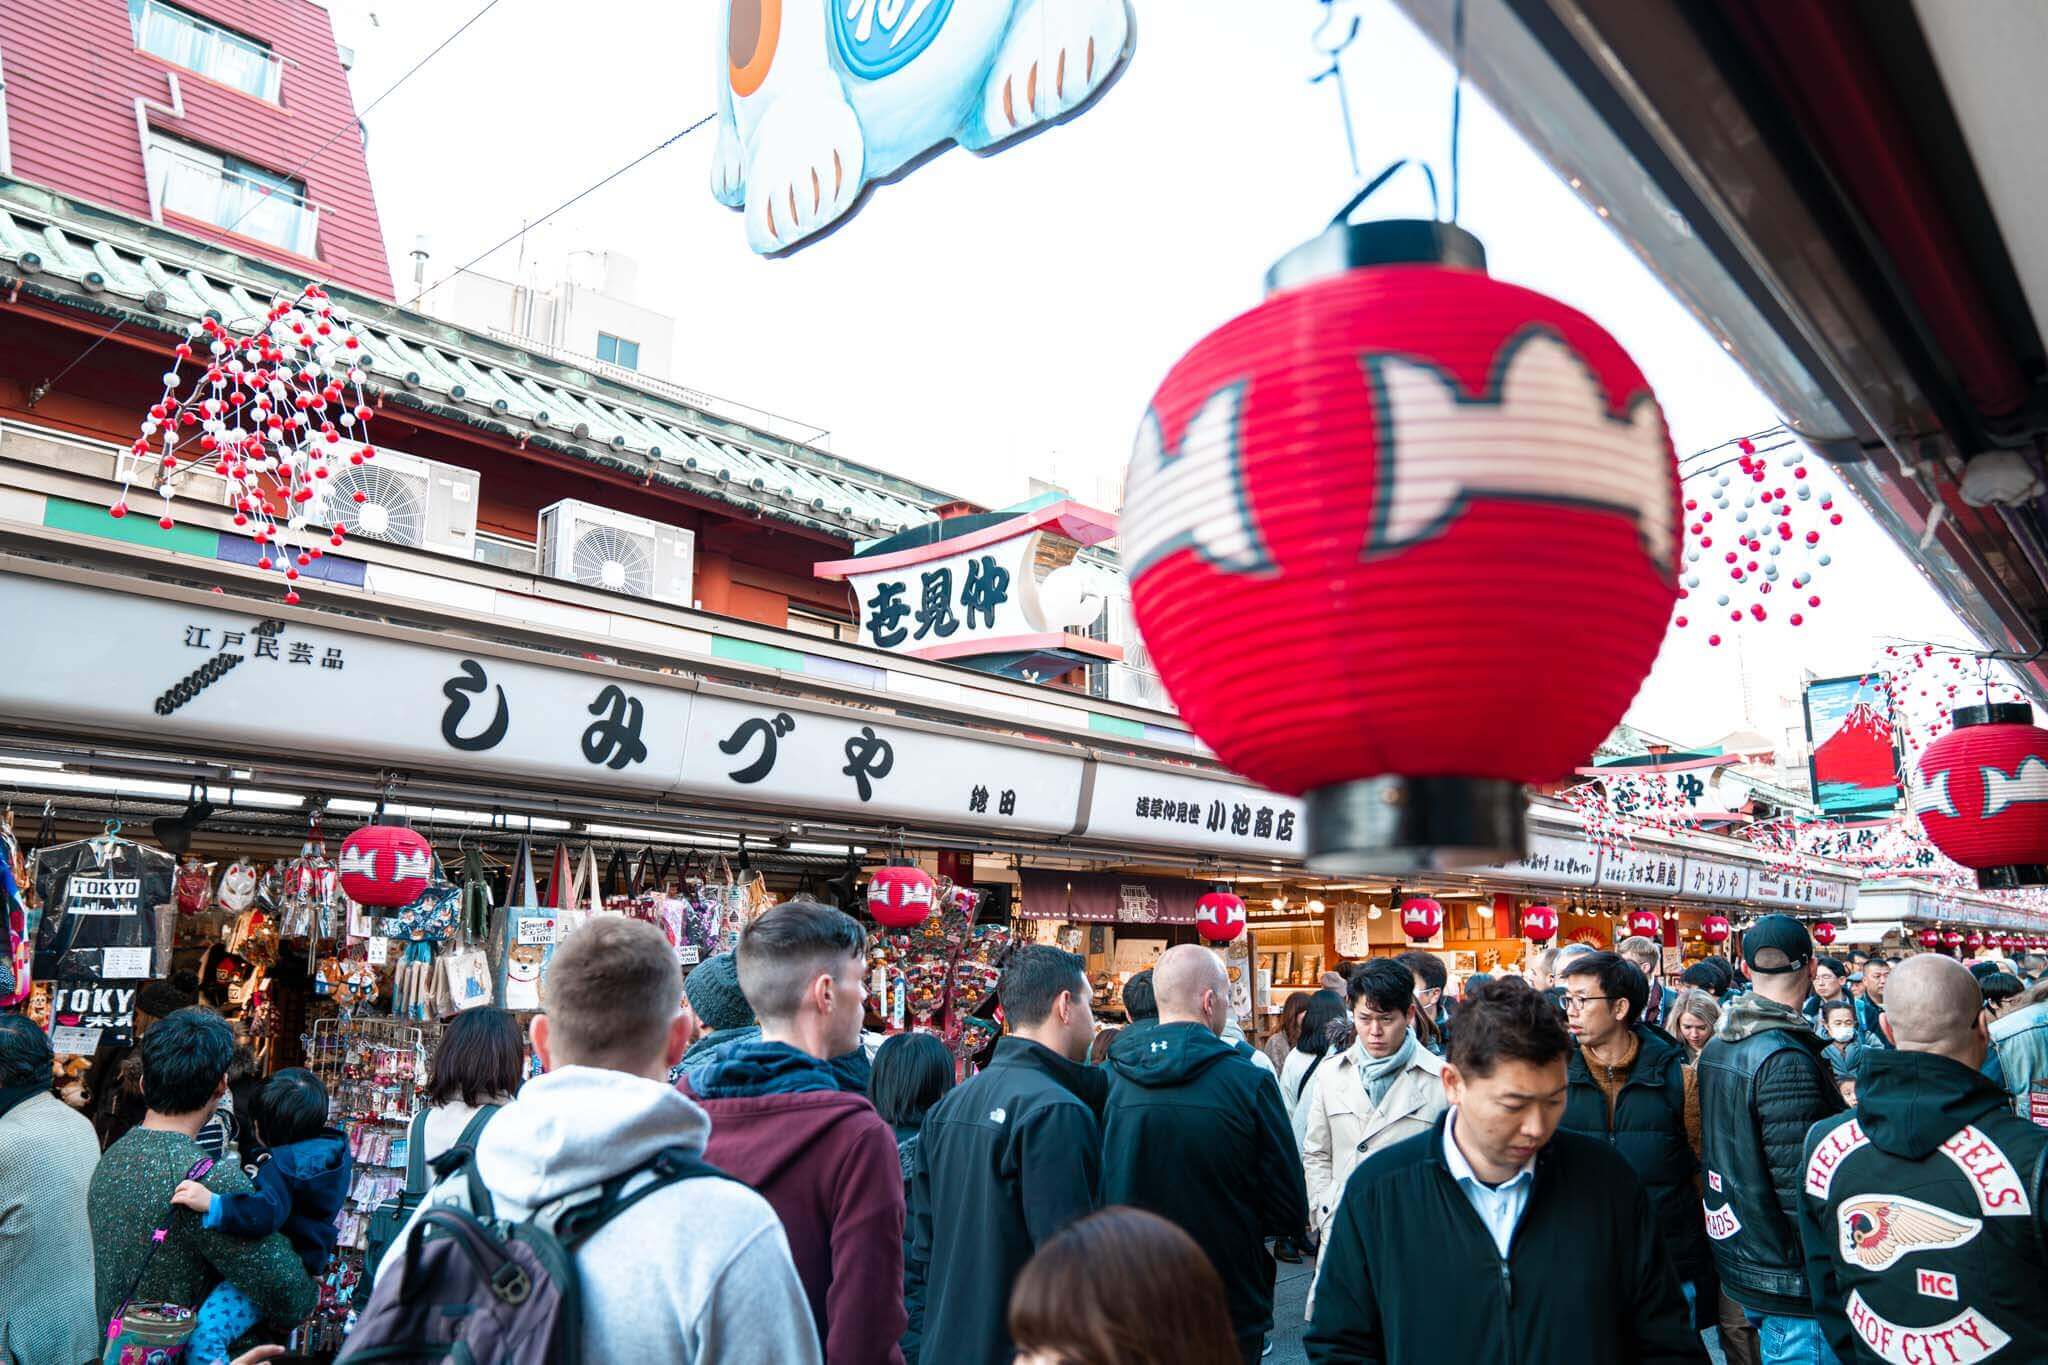 30 cool things you must do in Tokyo